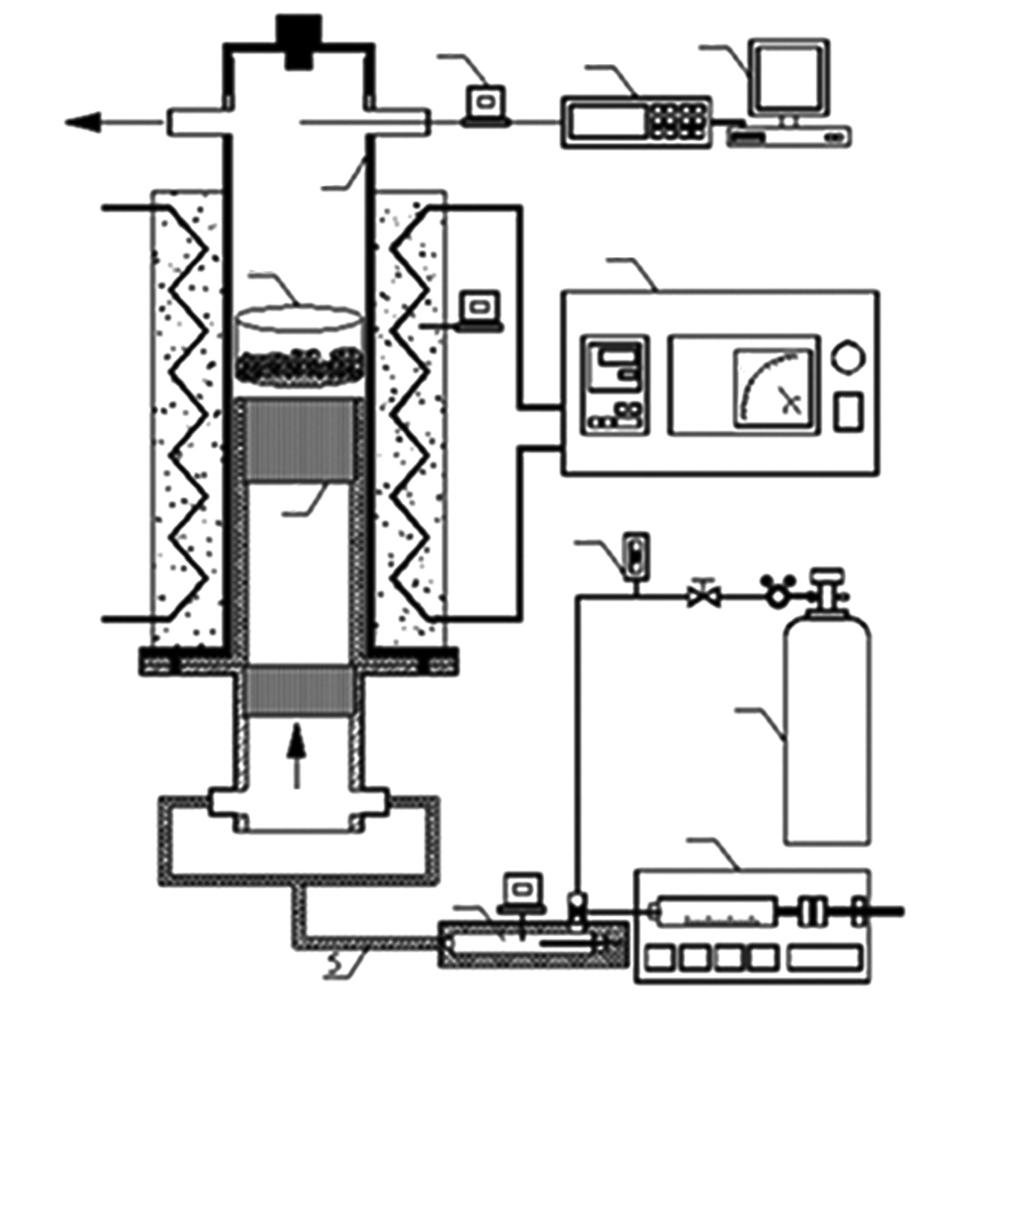 Carbonization and Steam Activation of Sludge The Open Process Chemistry Journal, 009, Volume 1 activation process, steam was provided, with a steam generator installed.